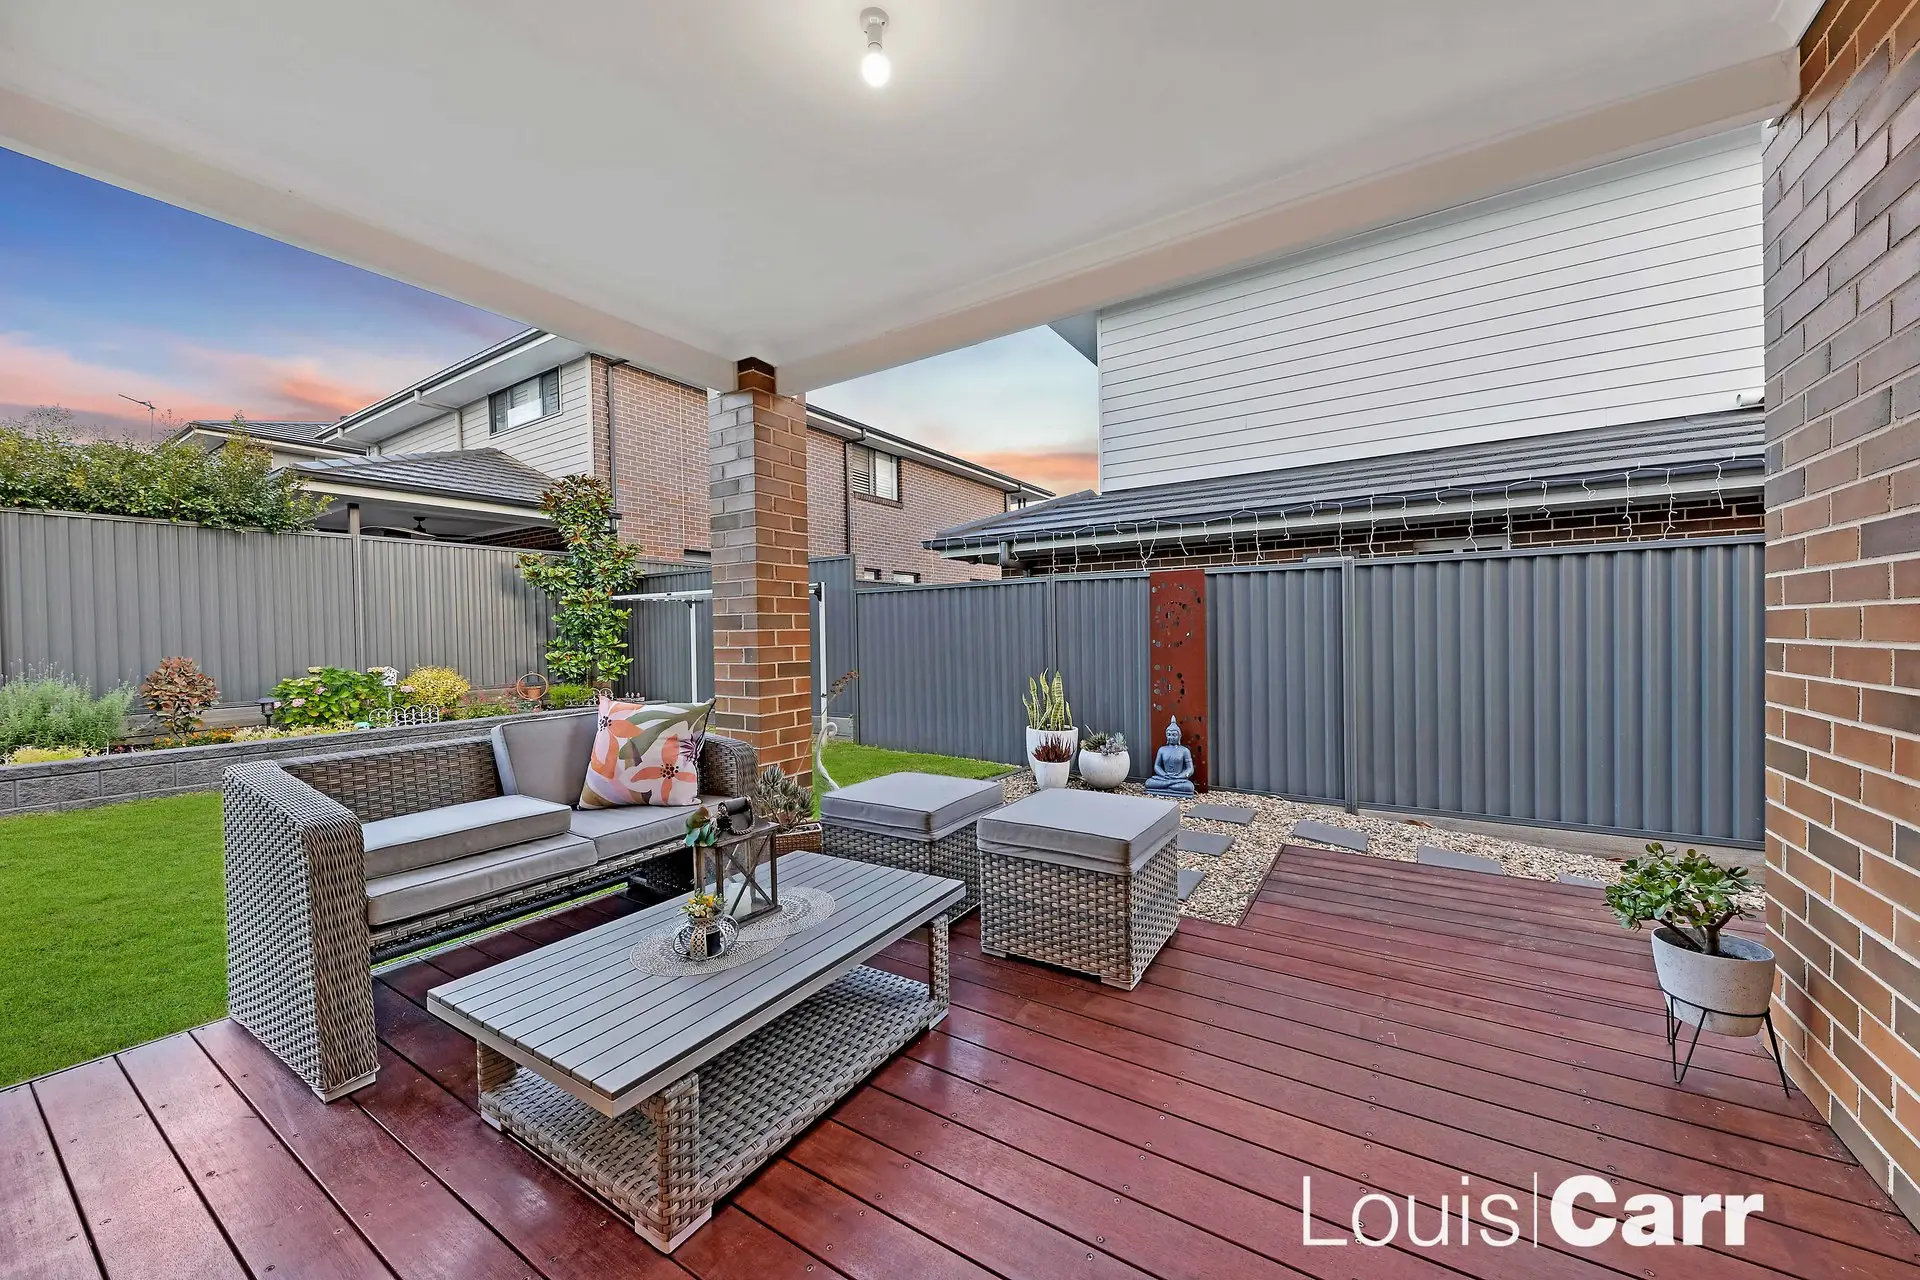 Photo #13: 28 Springbrook Boulevard, North Kellyville - Sold by Louis Carr Real Estate